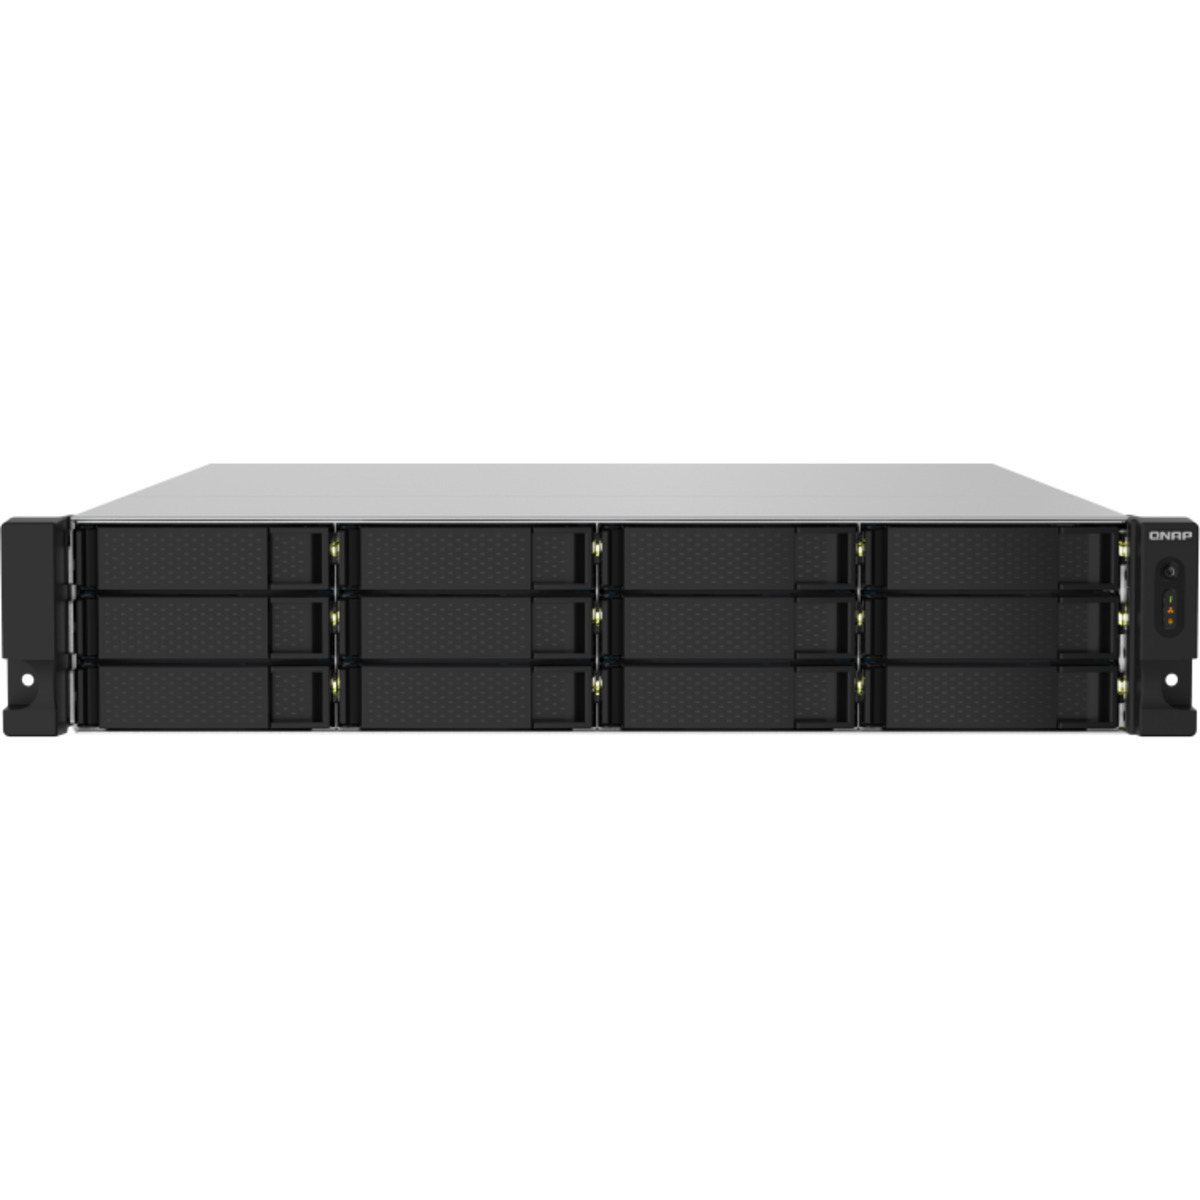 QNAP TS-1232PXU-RP 242tb 12-Bay RackMount Personal / Basic Home / Small Office NAS - Network Attached Storage Device 11x22tb Western Digital Gold WD221KRYZ 3.5 7200rpm SATA 6Gb/s HDD ENTERPRISE Class Drives Installed - Burn-In Tested - FREE RAM UPGRADE TS-1232PXU-RP